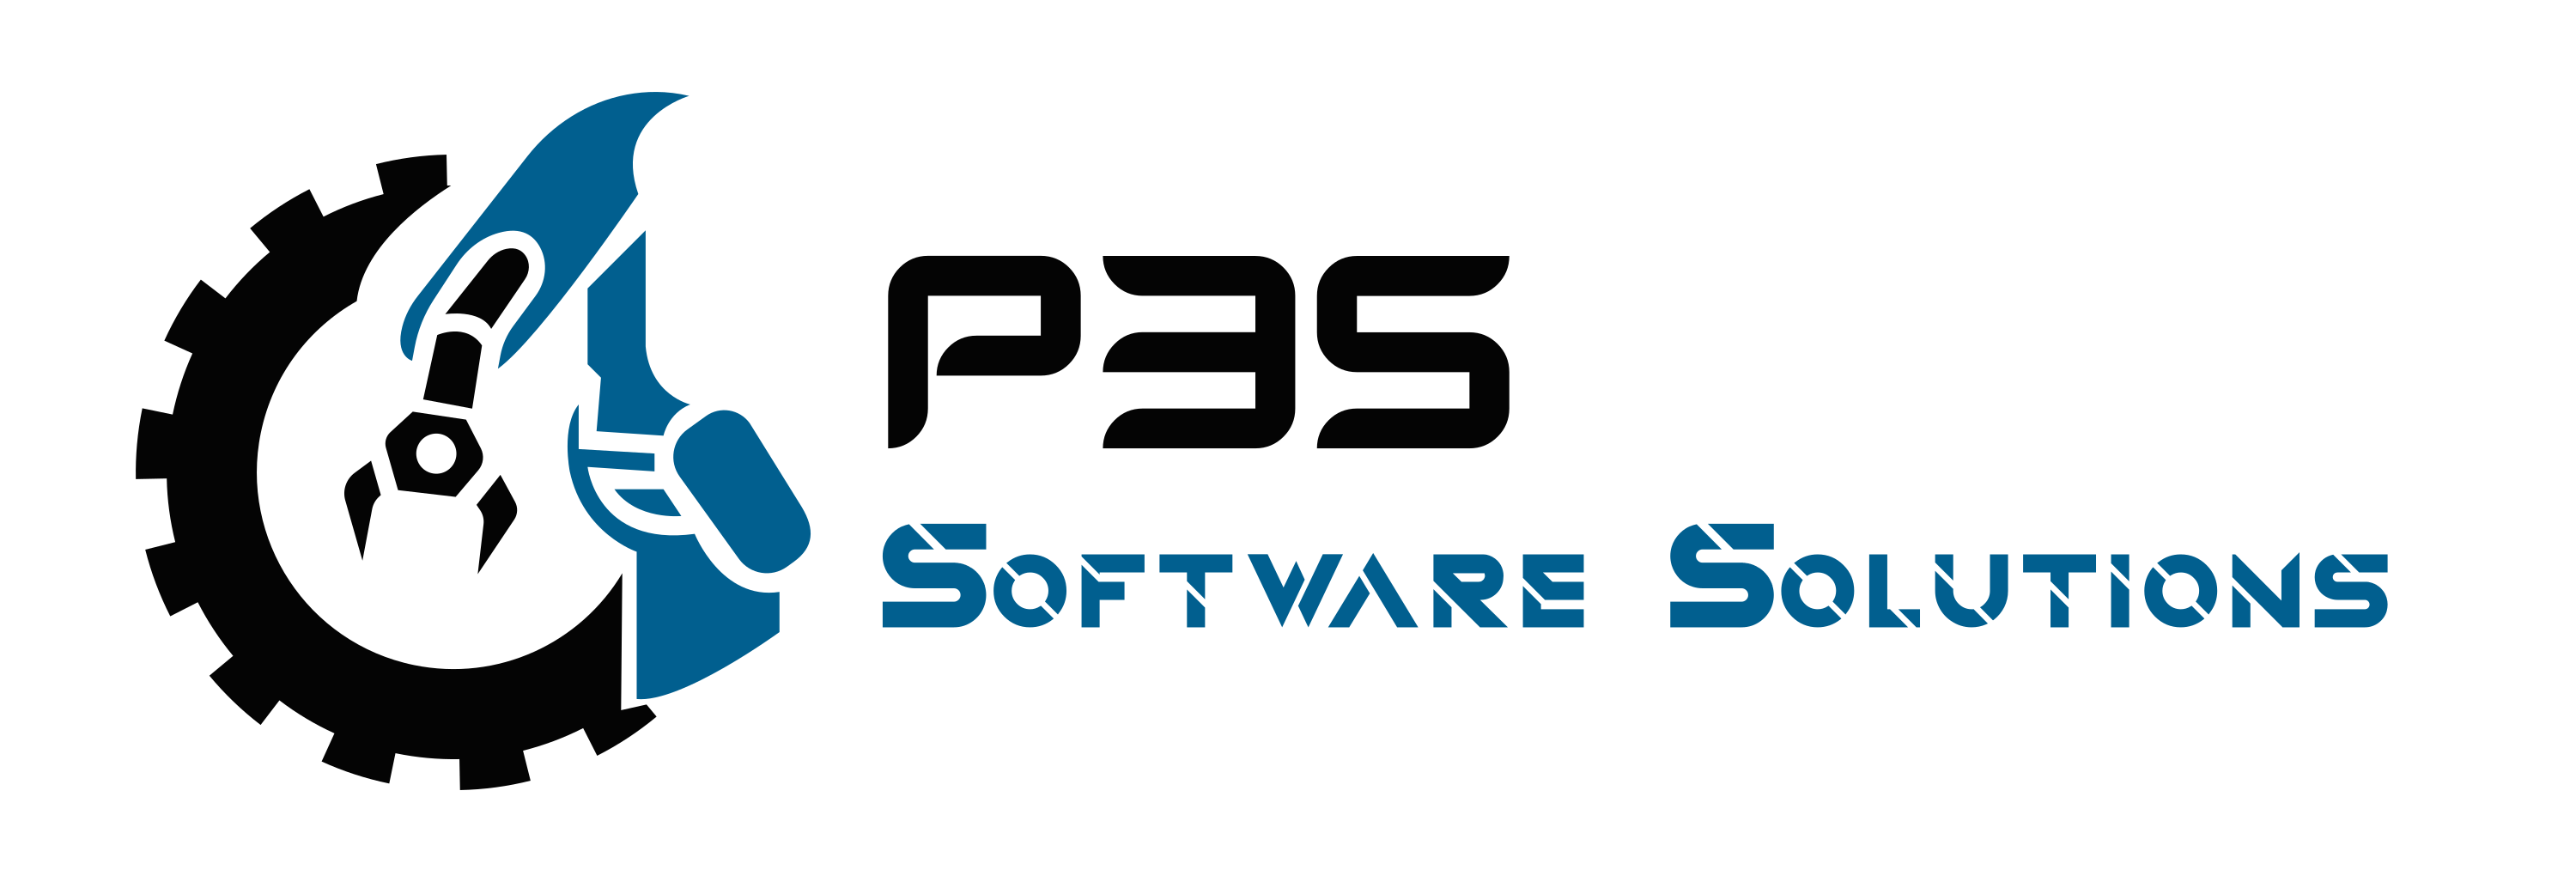 P3S Software Solutions Logo